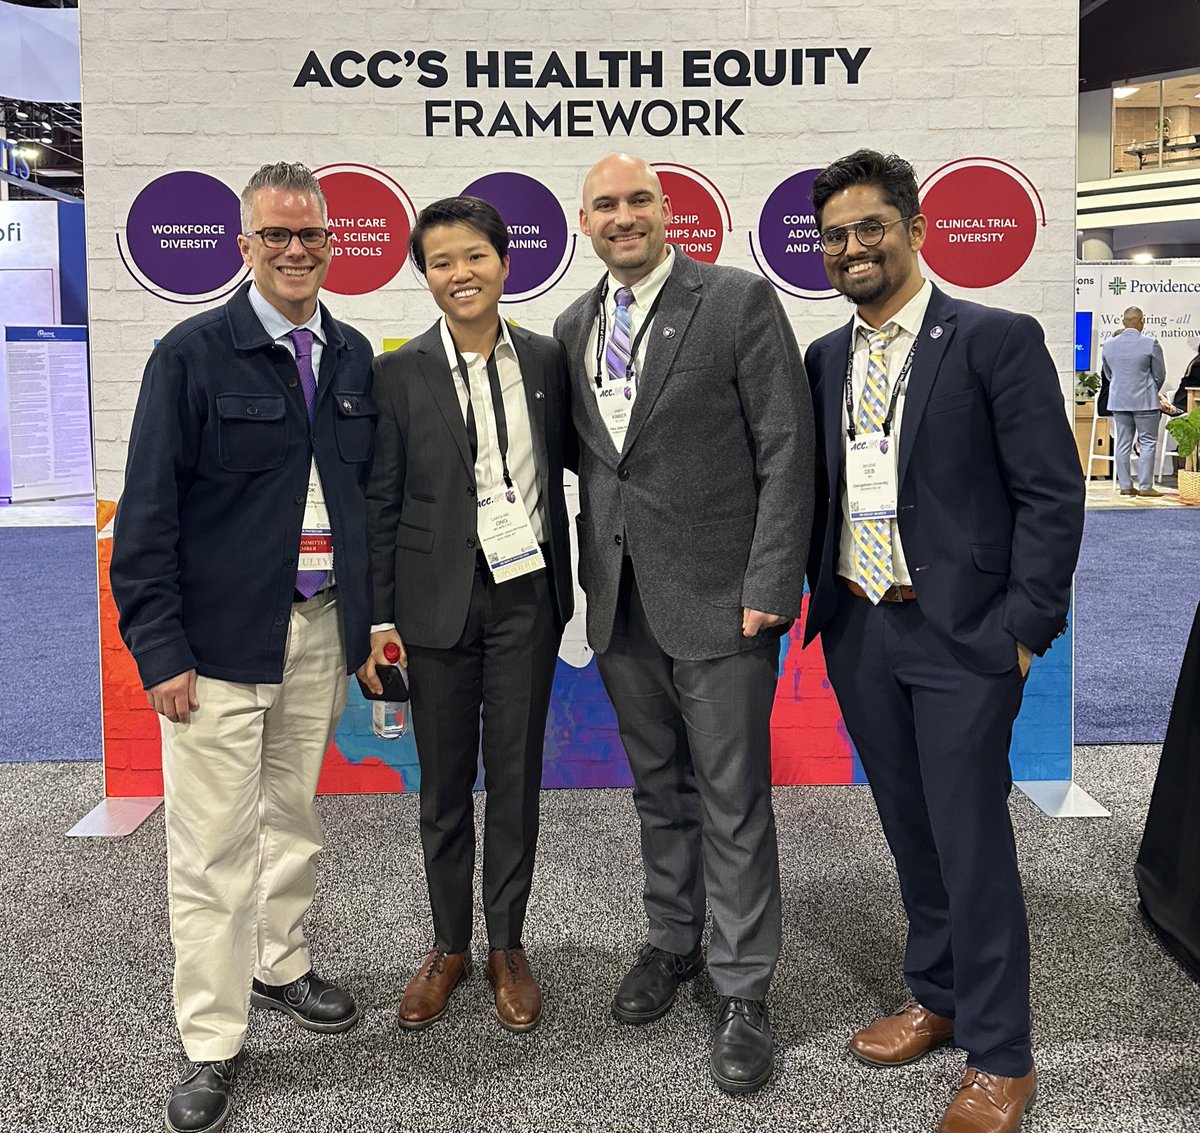 @RyanMeyerMPP @stephencookmd Our team discussing advancing cultural competency in CV care of 🌈 patients! @stephencookmd @CarolineOng_MD Dr Kimber!